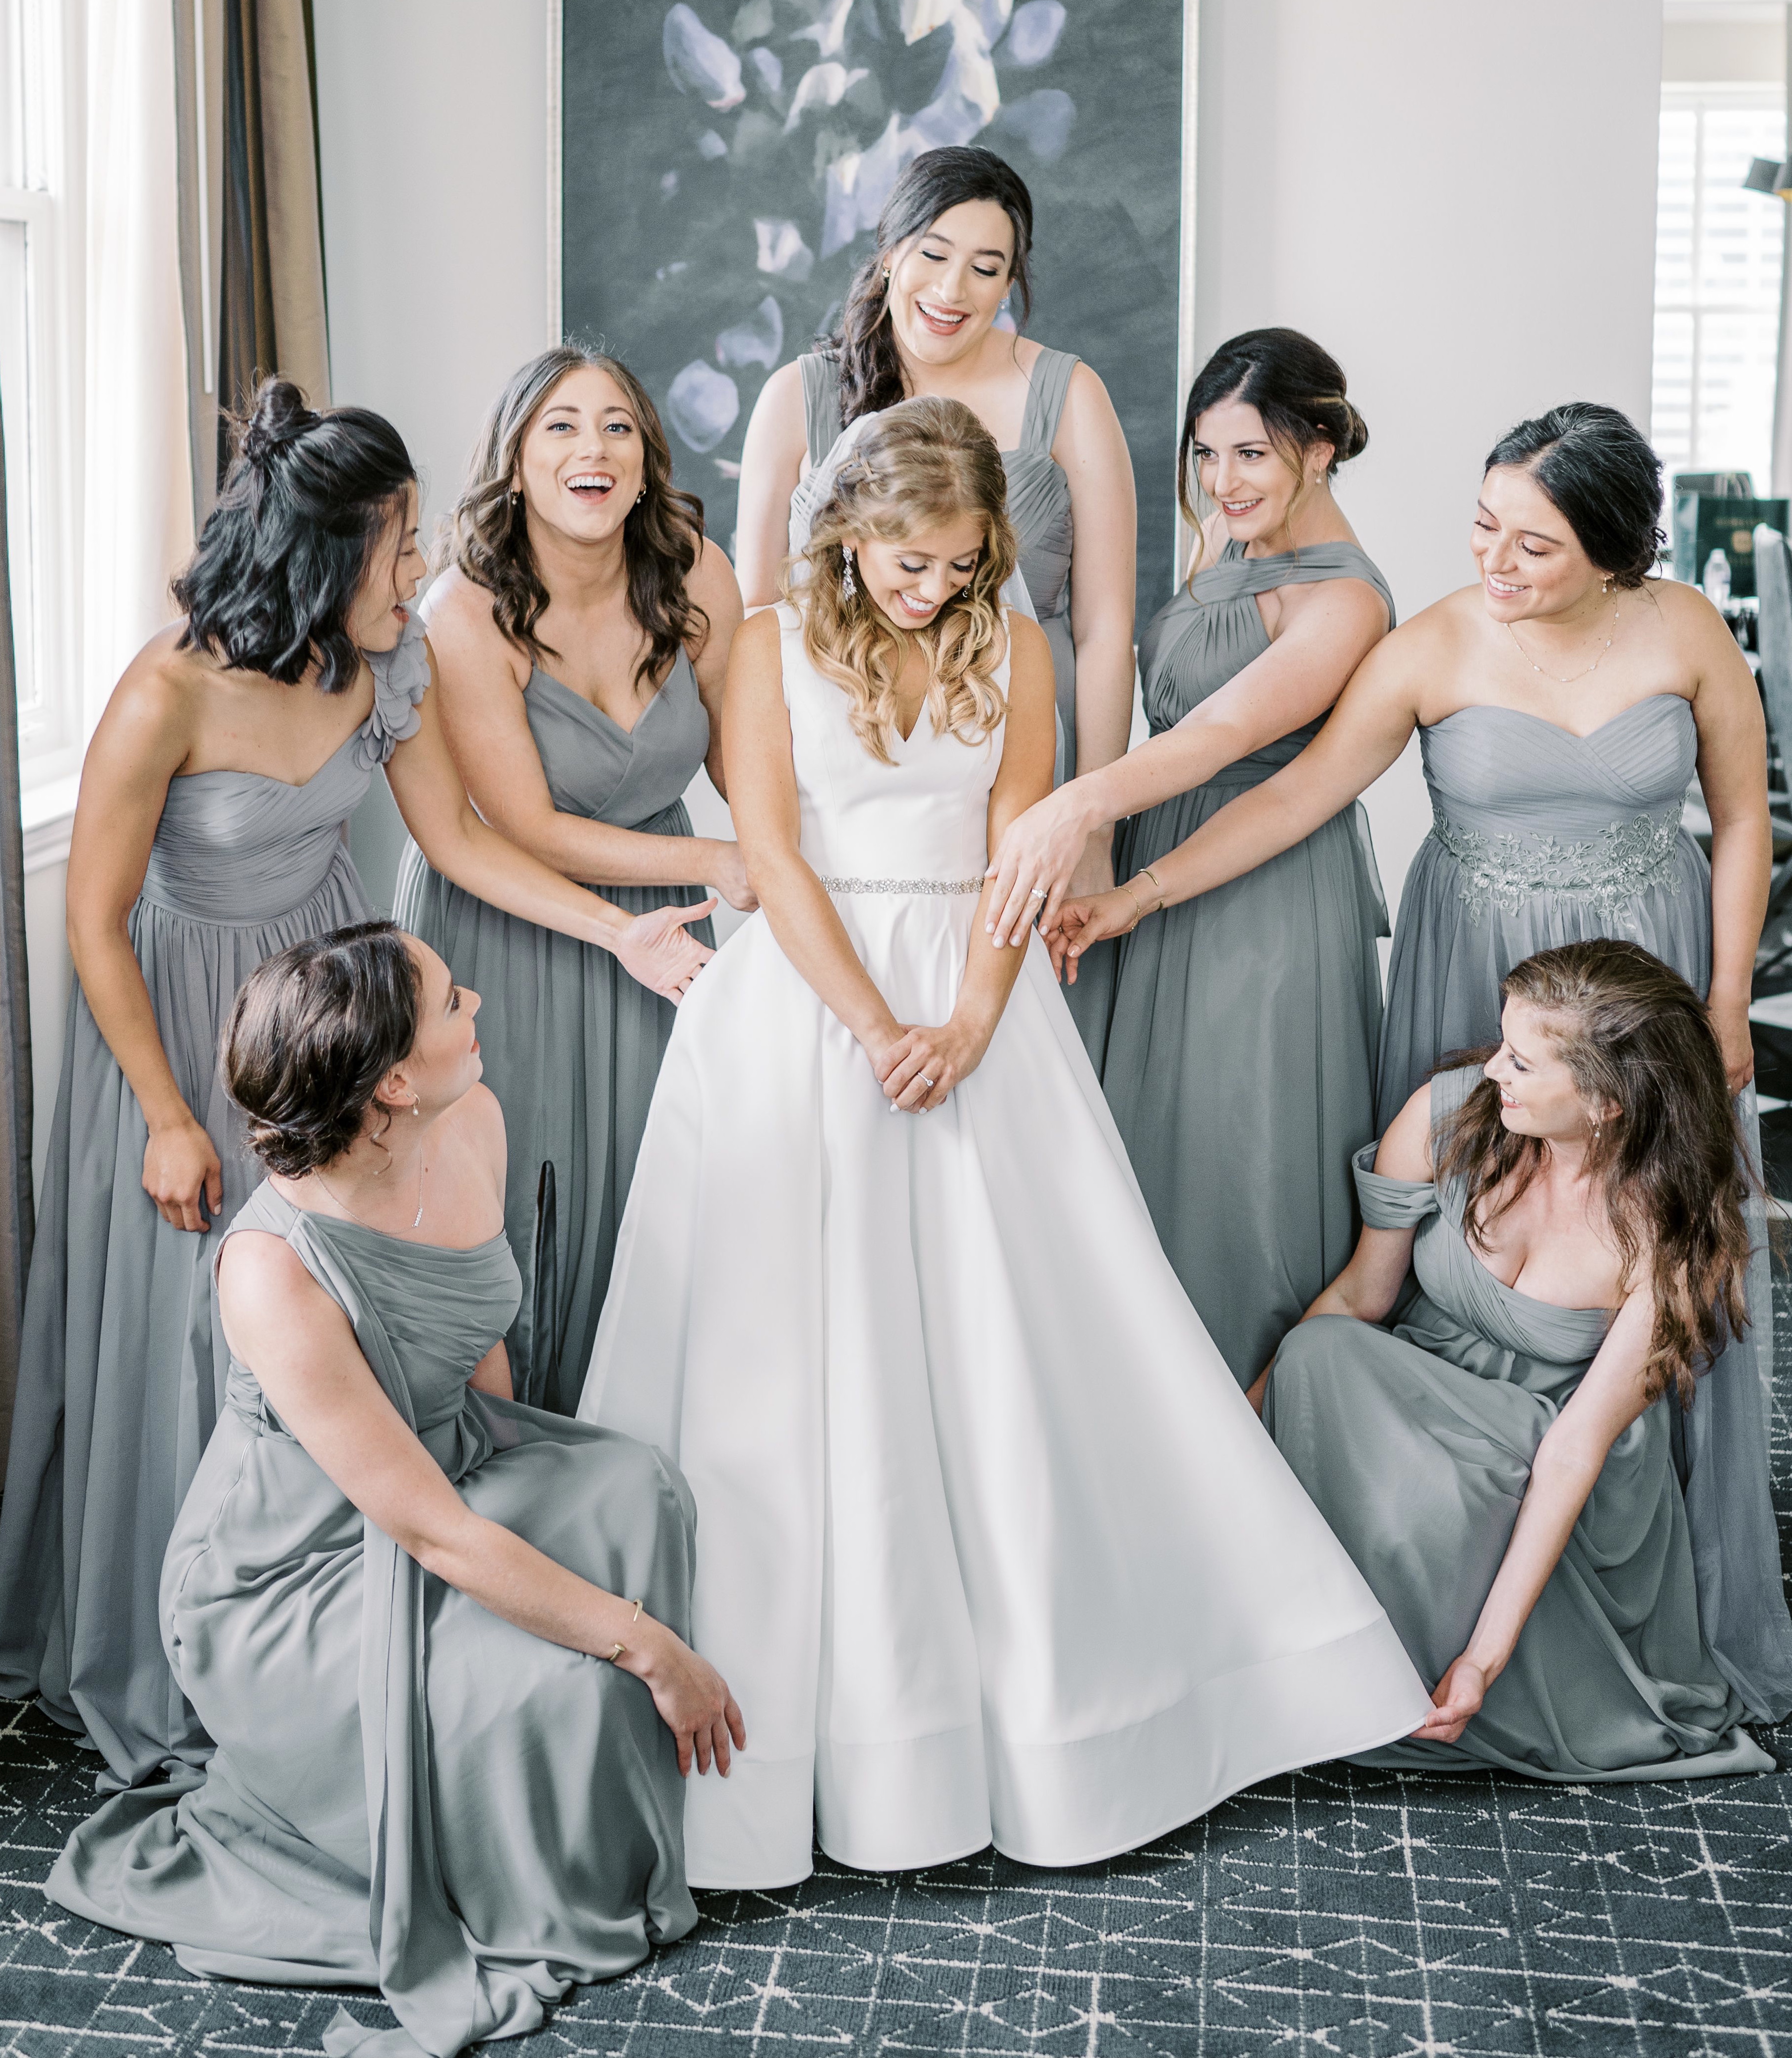 The bride is in her white wedding gown smiling and looking down at the floor while her bridesmaids surround her in monochromatic gray dresses and admire her.